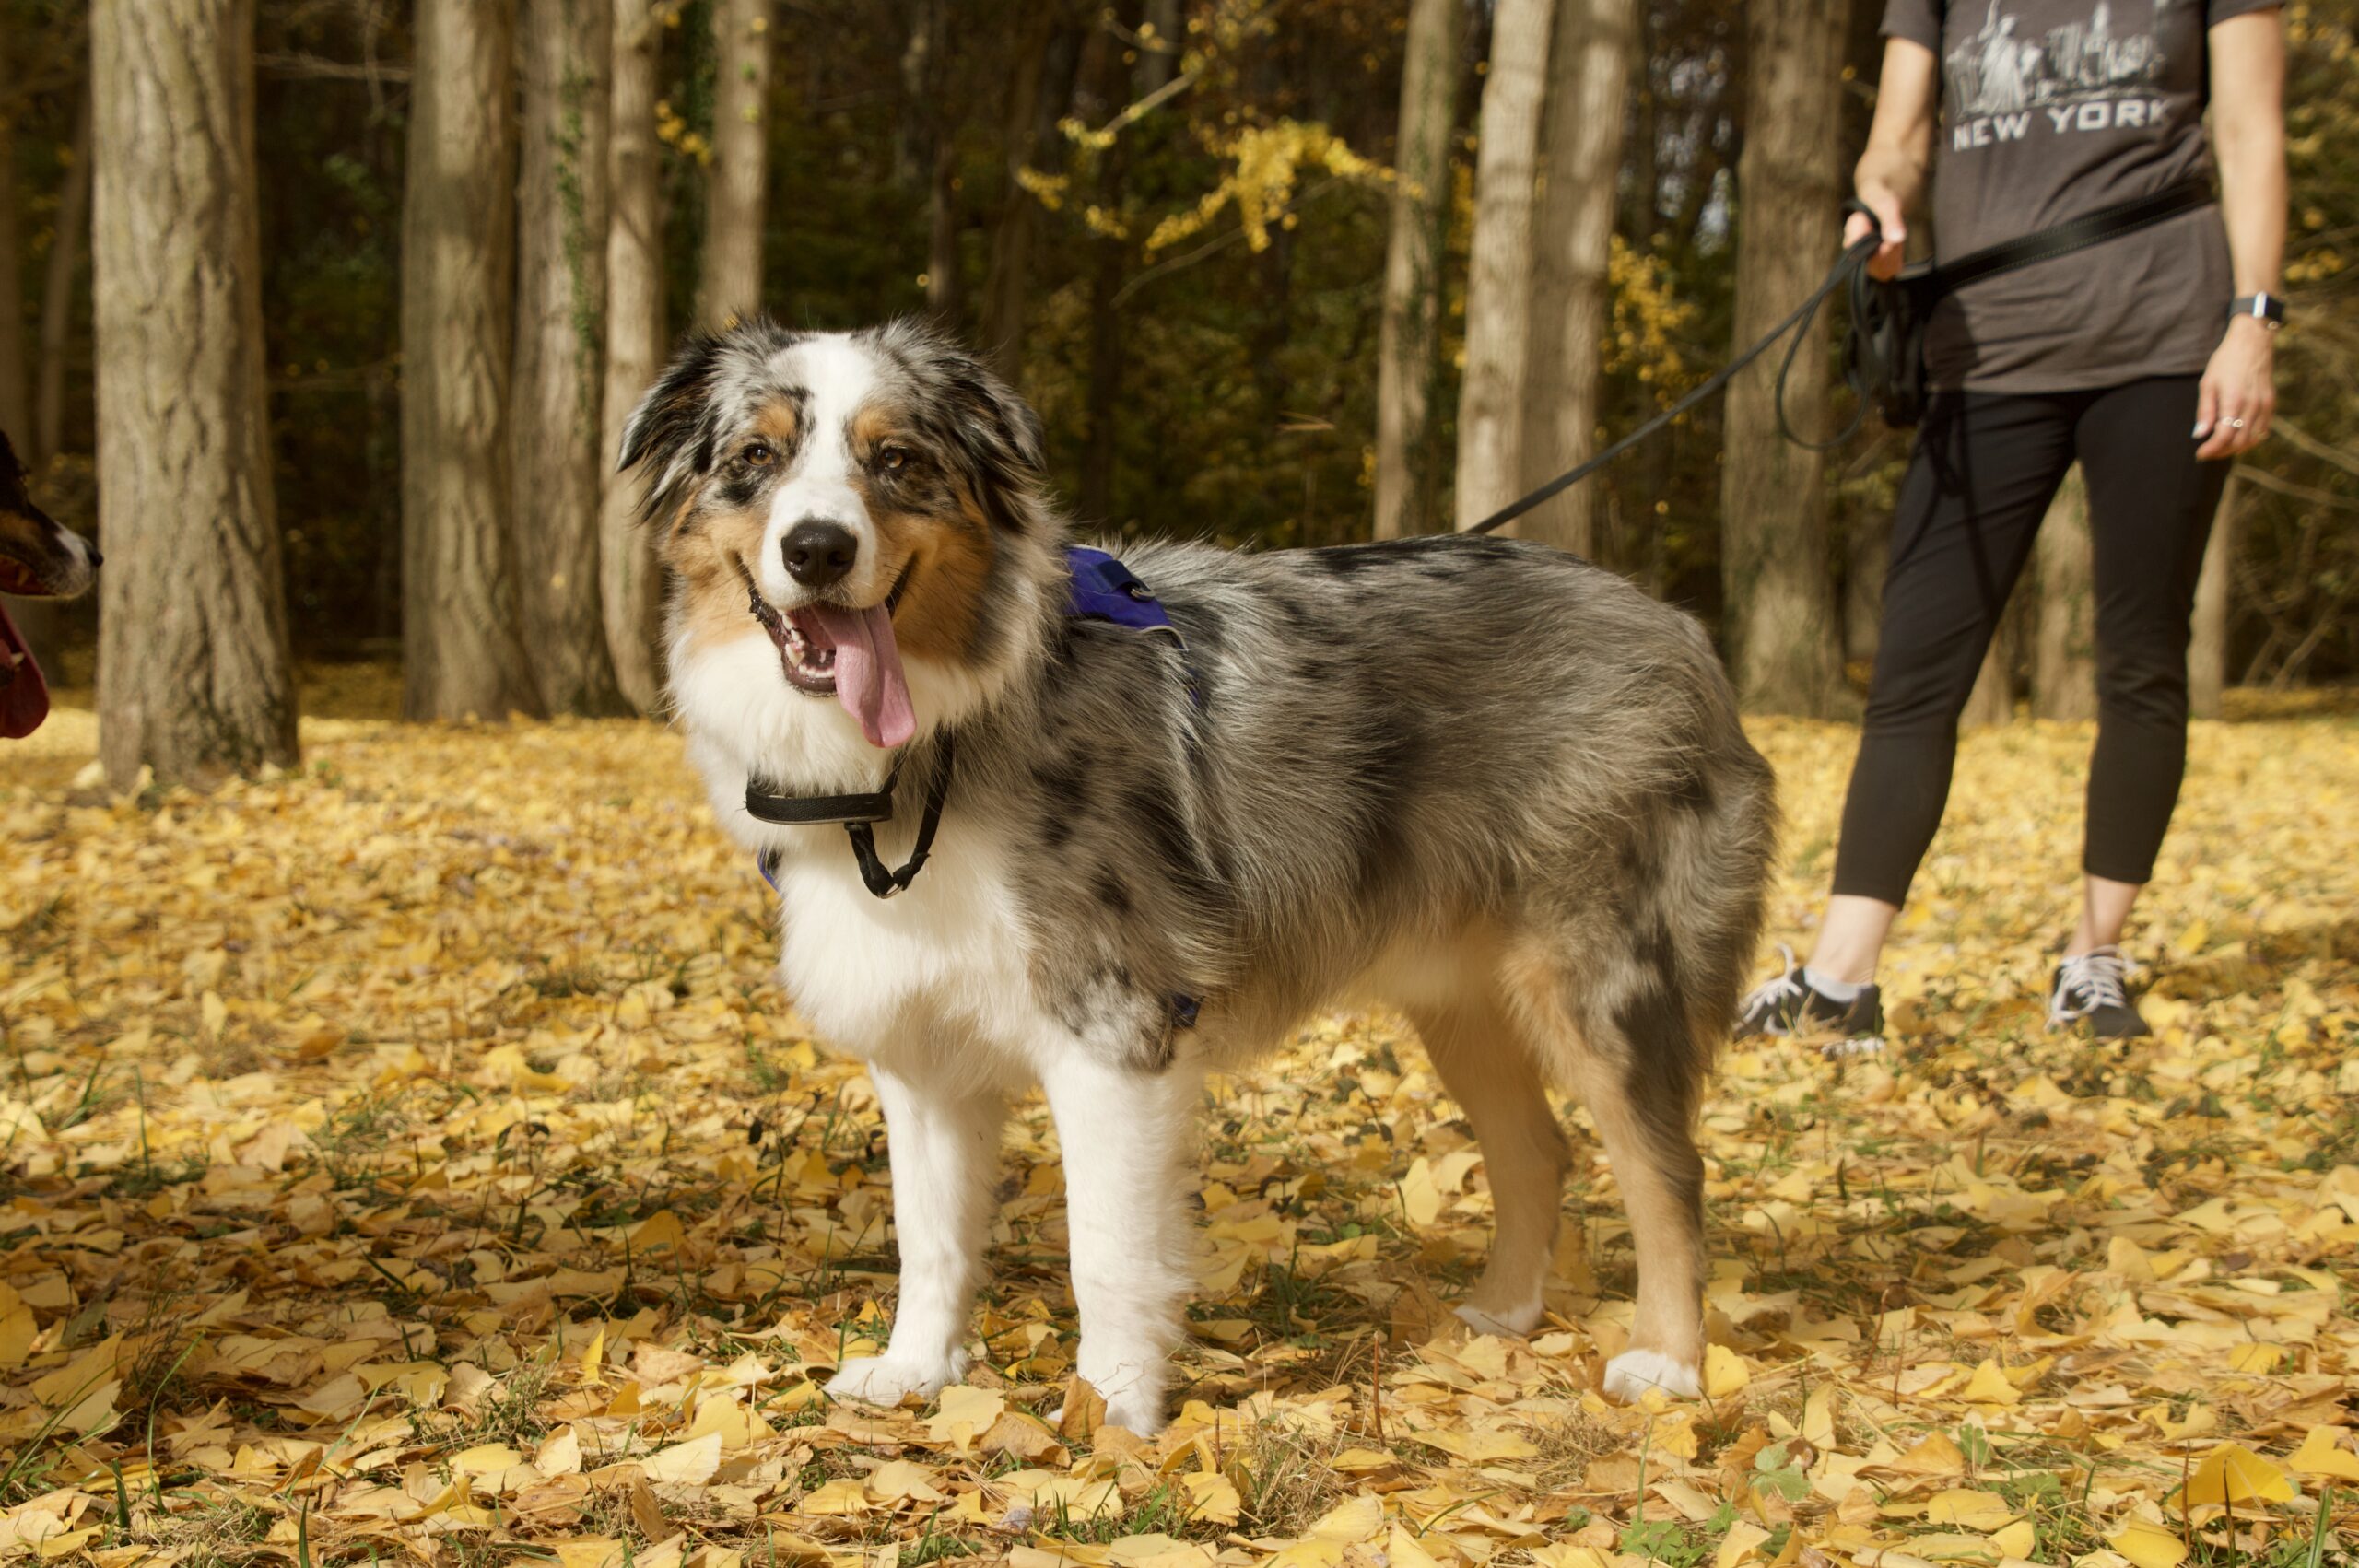 Australian shepherd standing in yellow/orange leaves with his tongue sticking out